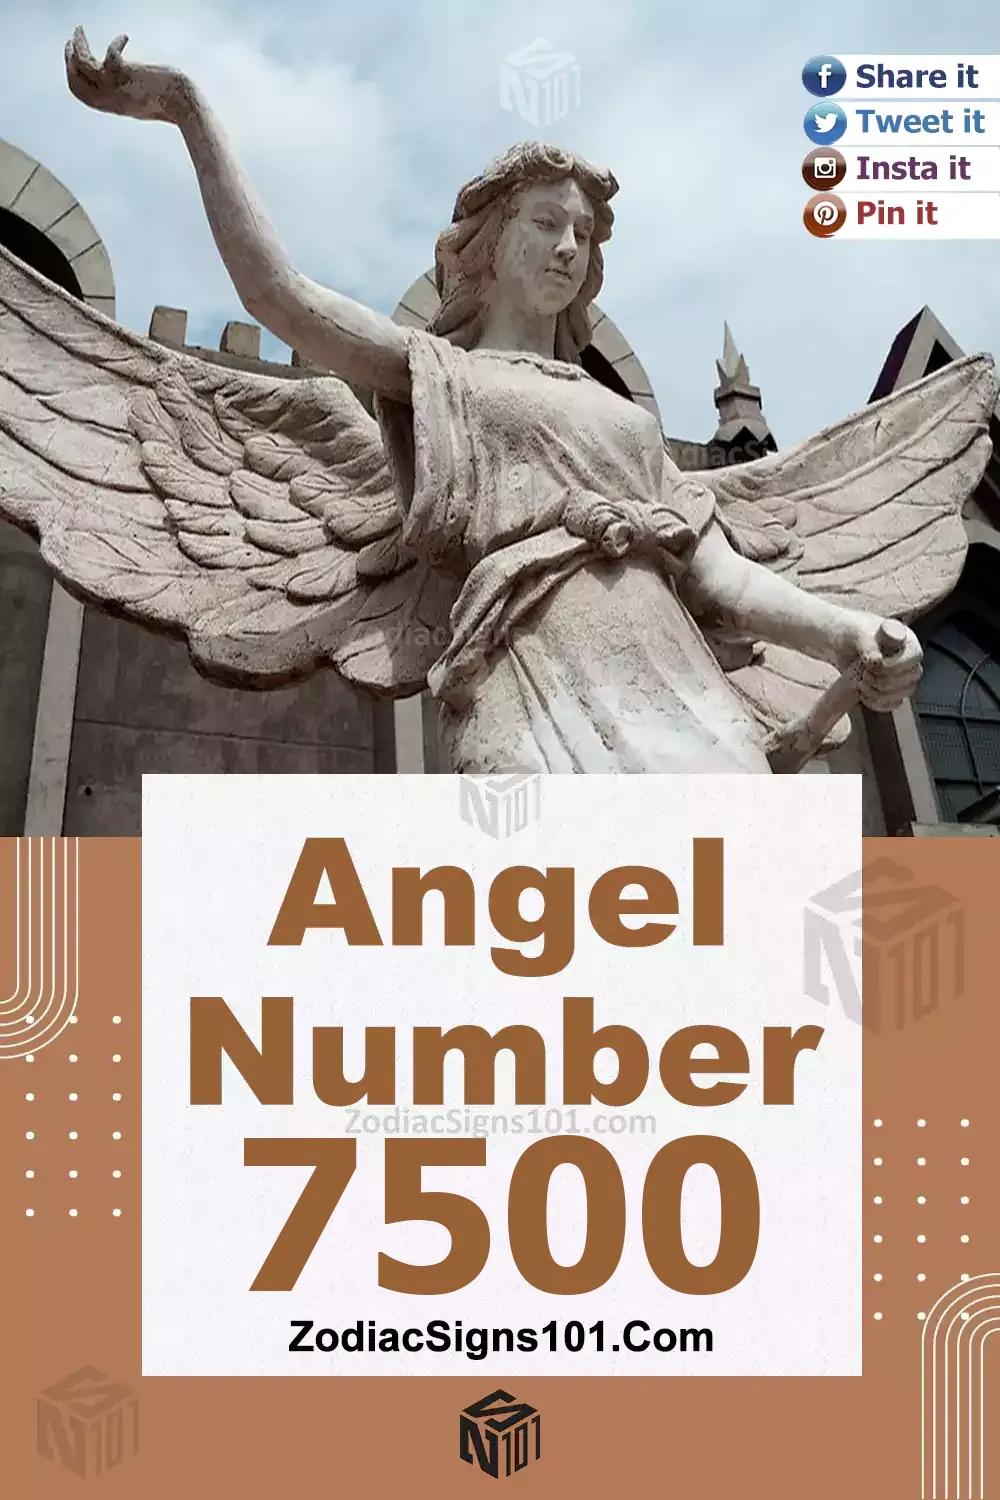 7500 Angel Number Meaning